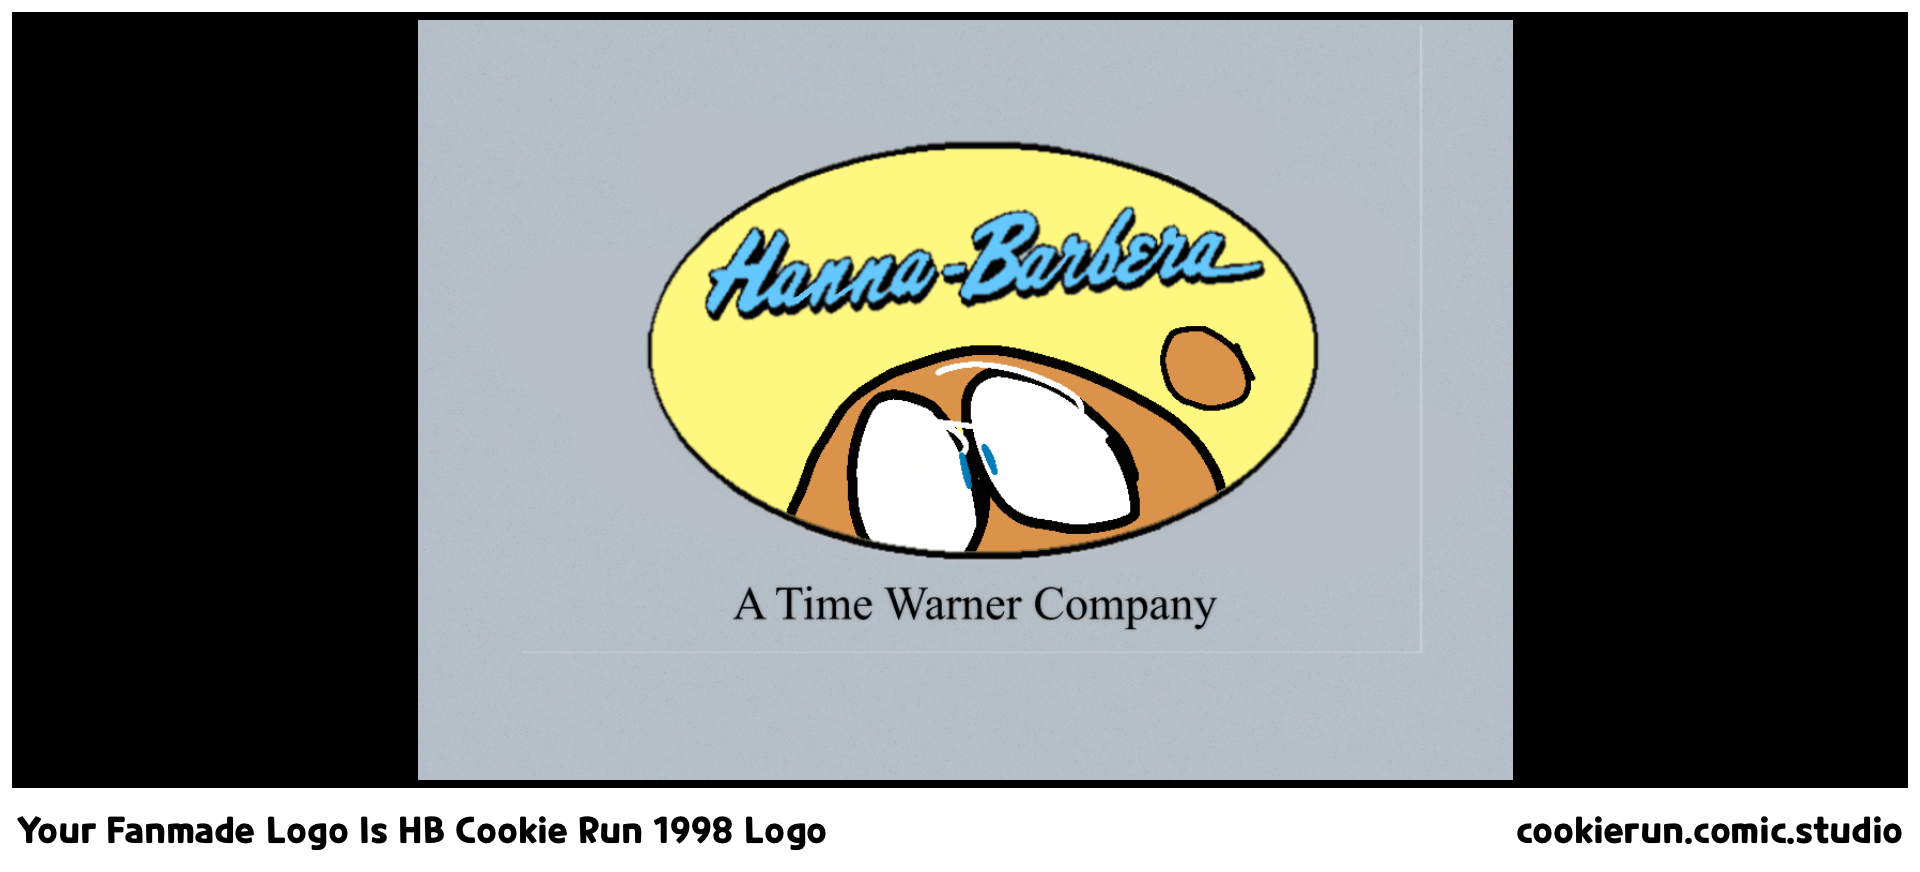 Your Fanmade Logo Is HB Cookie Run 1998 Logo